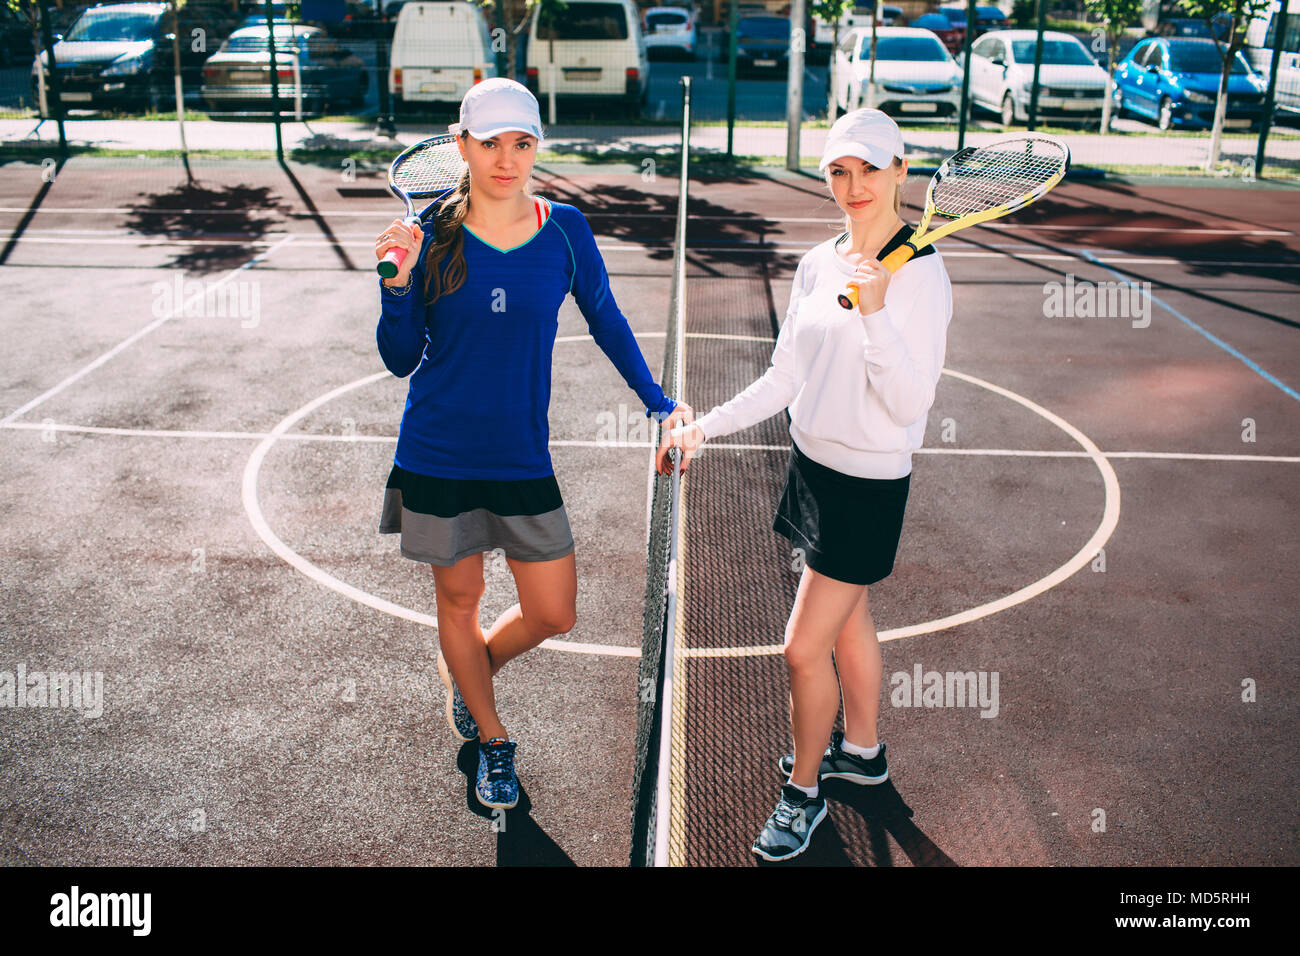 beginning of the game of tennis, two girls tennis players Stock Photo